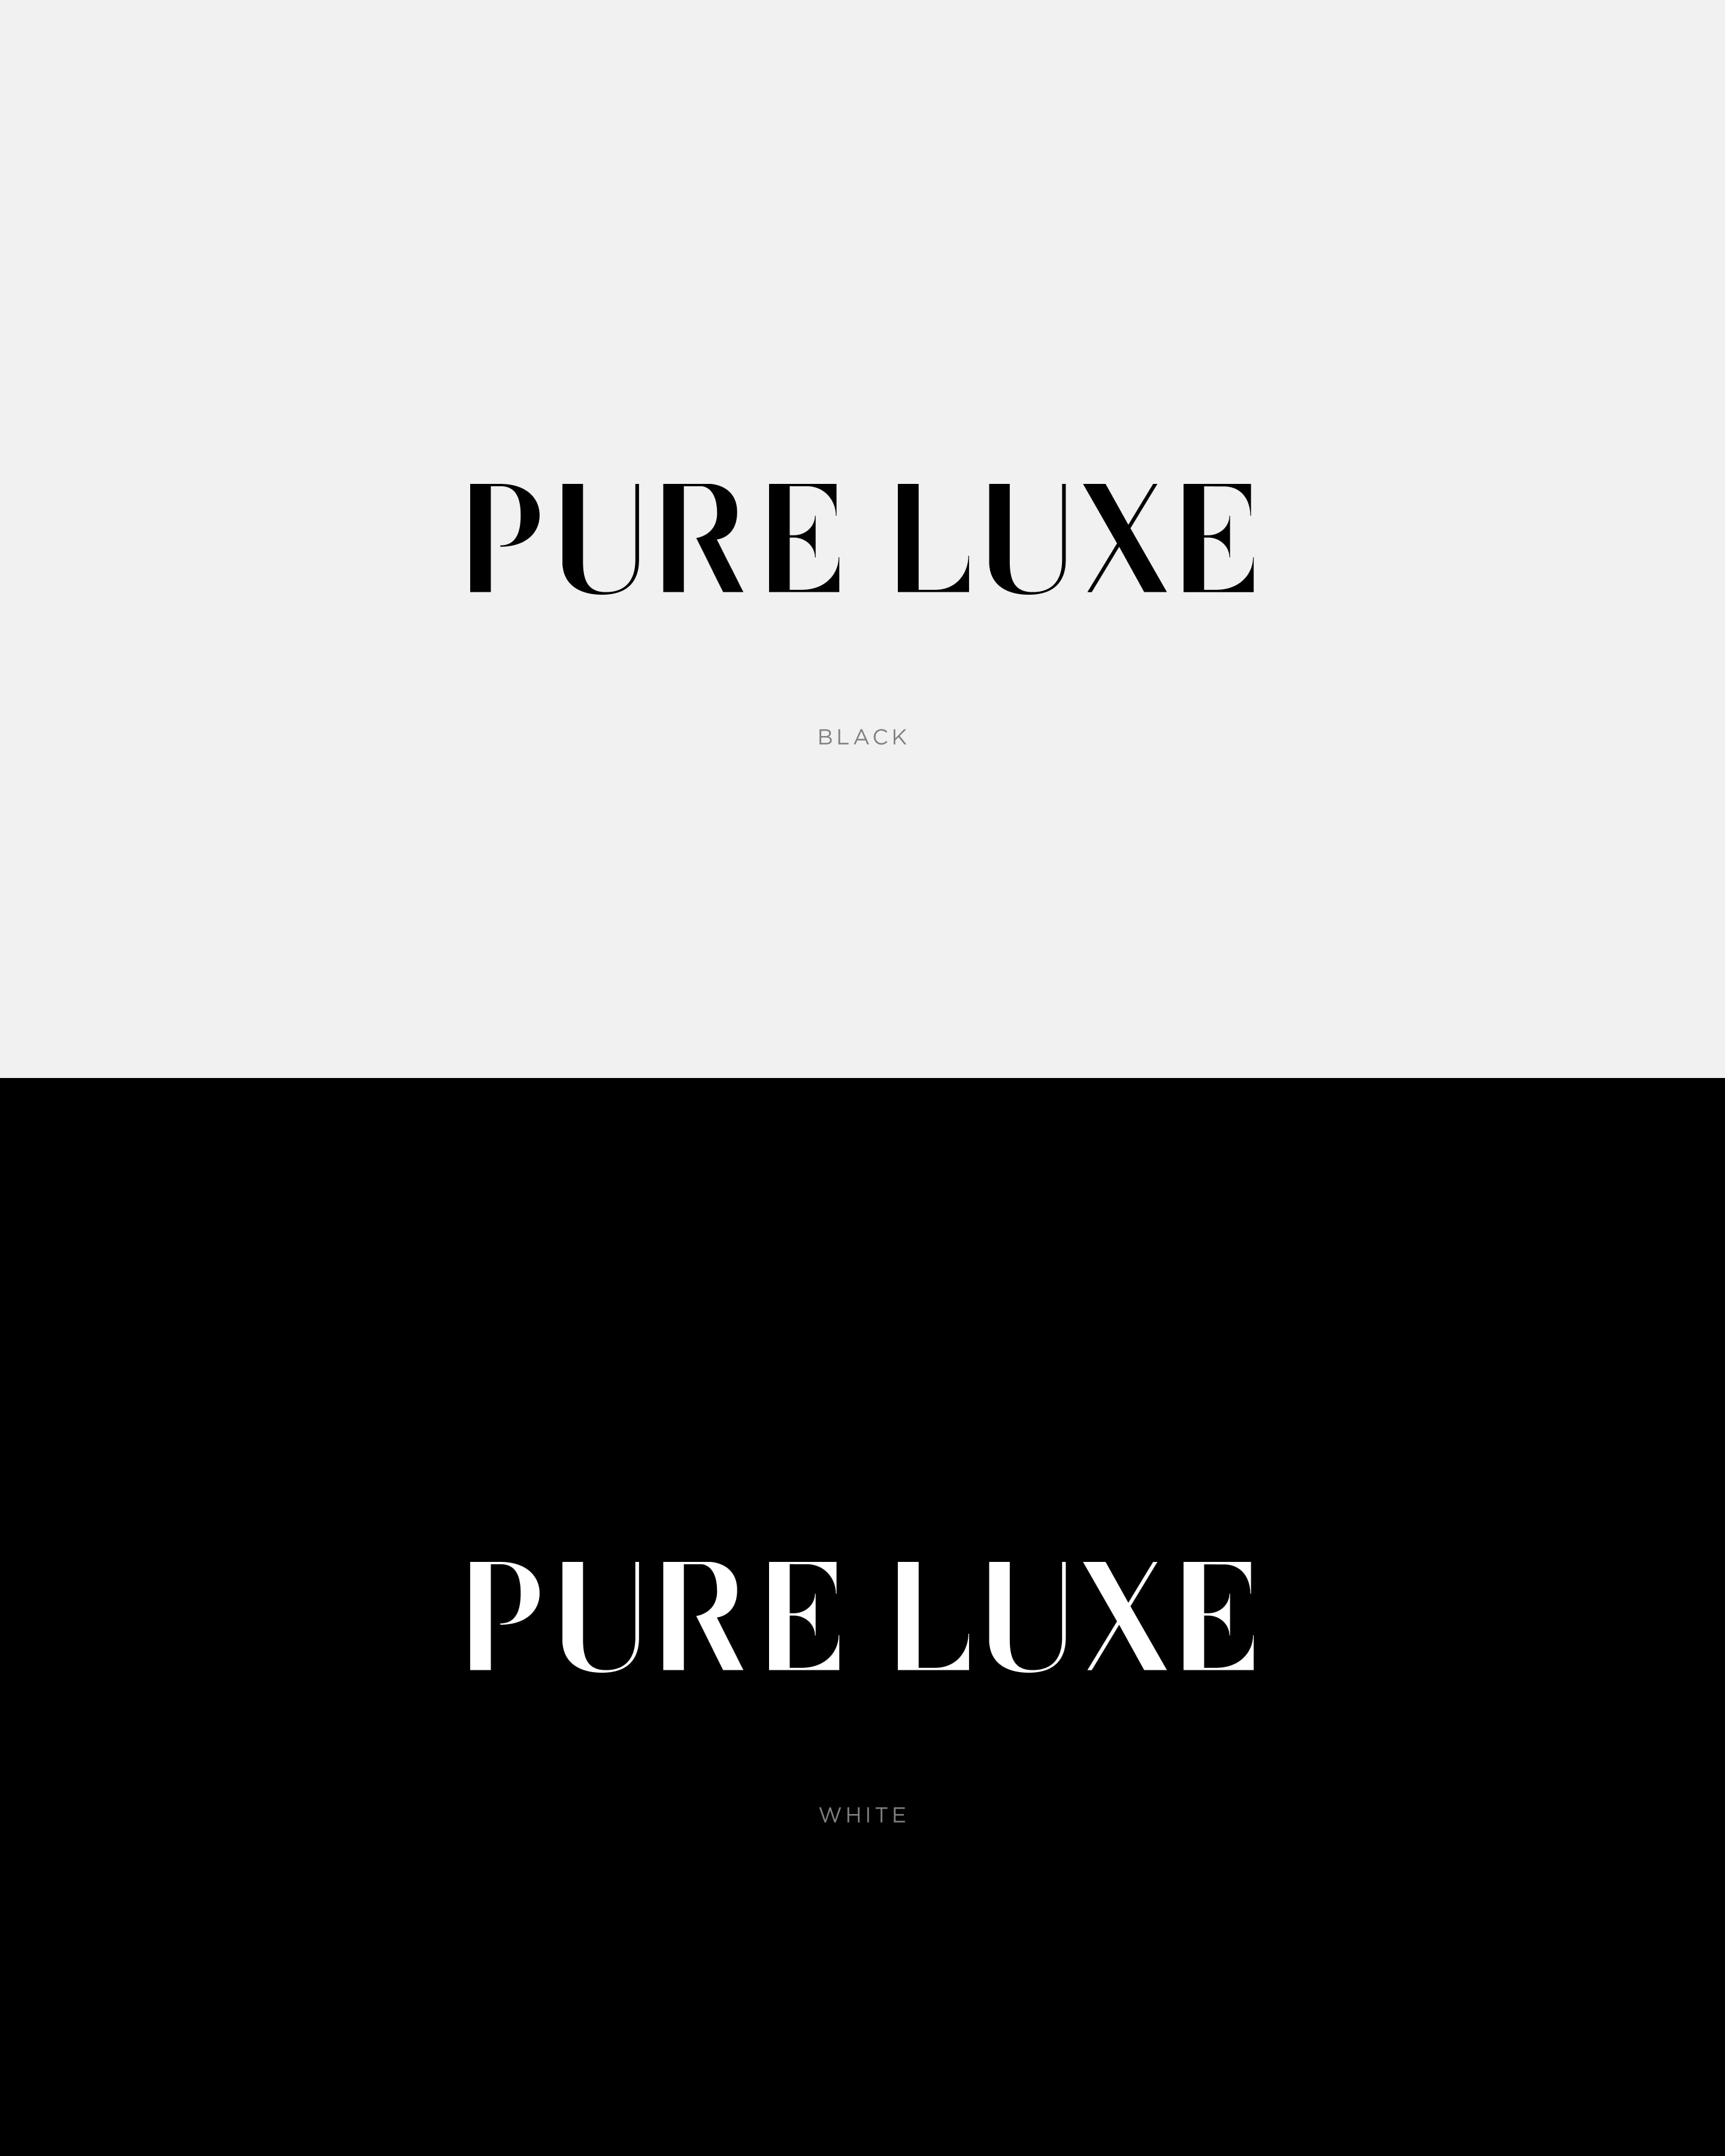 https://www.lucasberghoef.com/wp-content/uploads/2021/08/Visual-Identity-Pure-Luxe-8.jpg